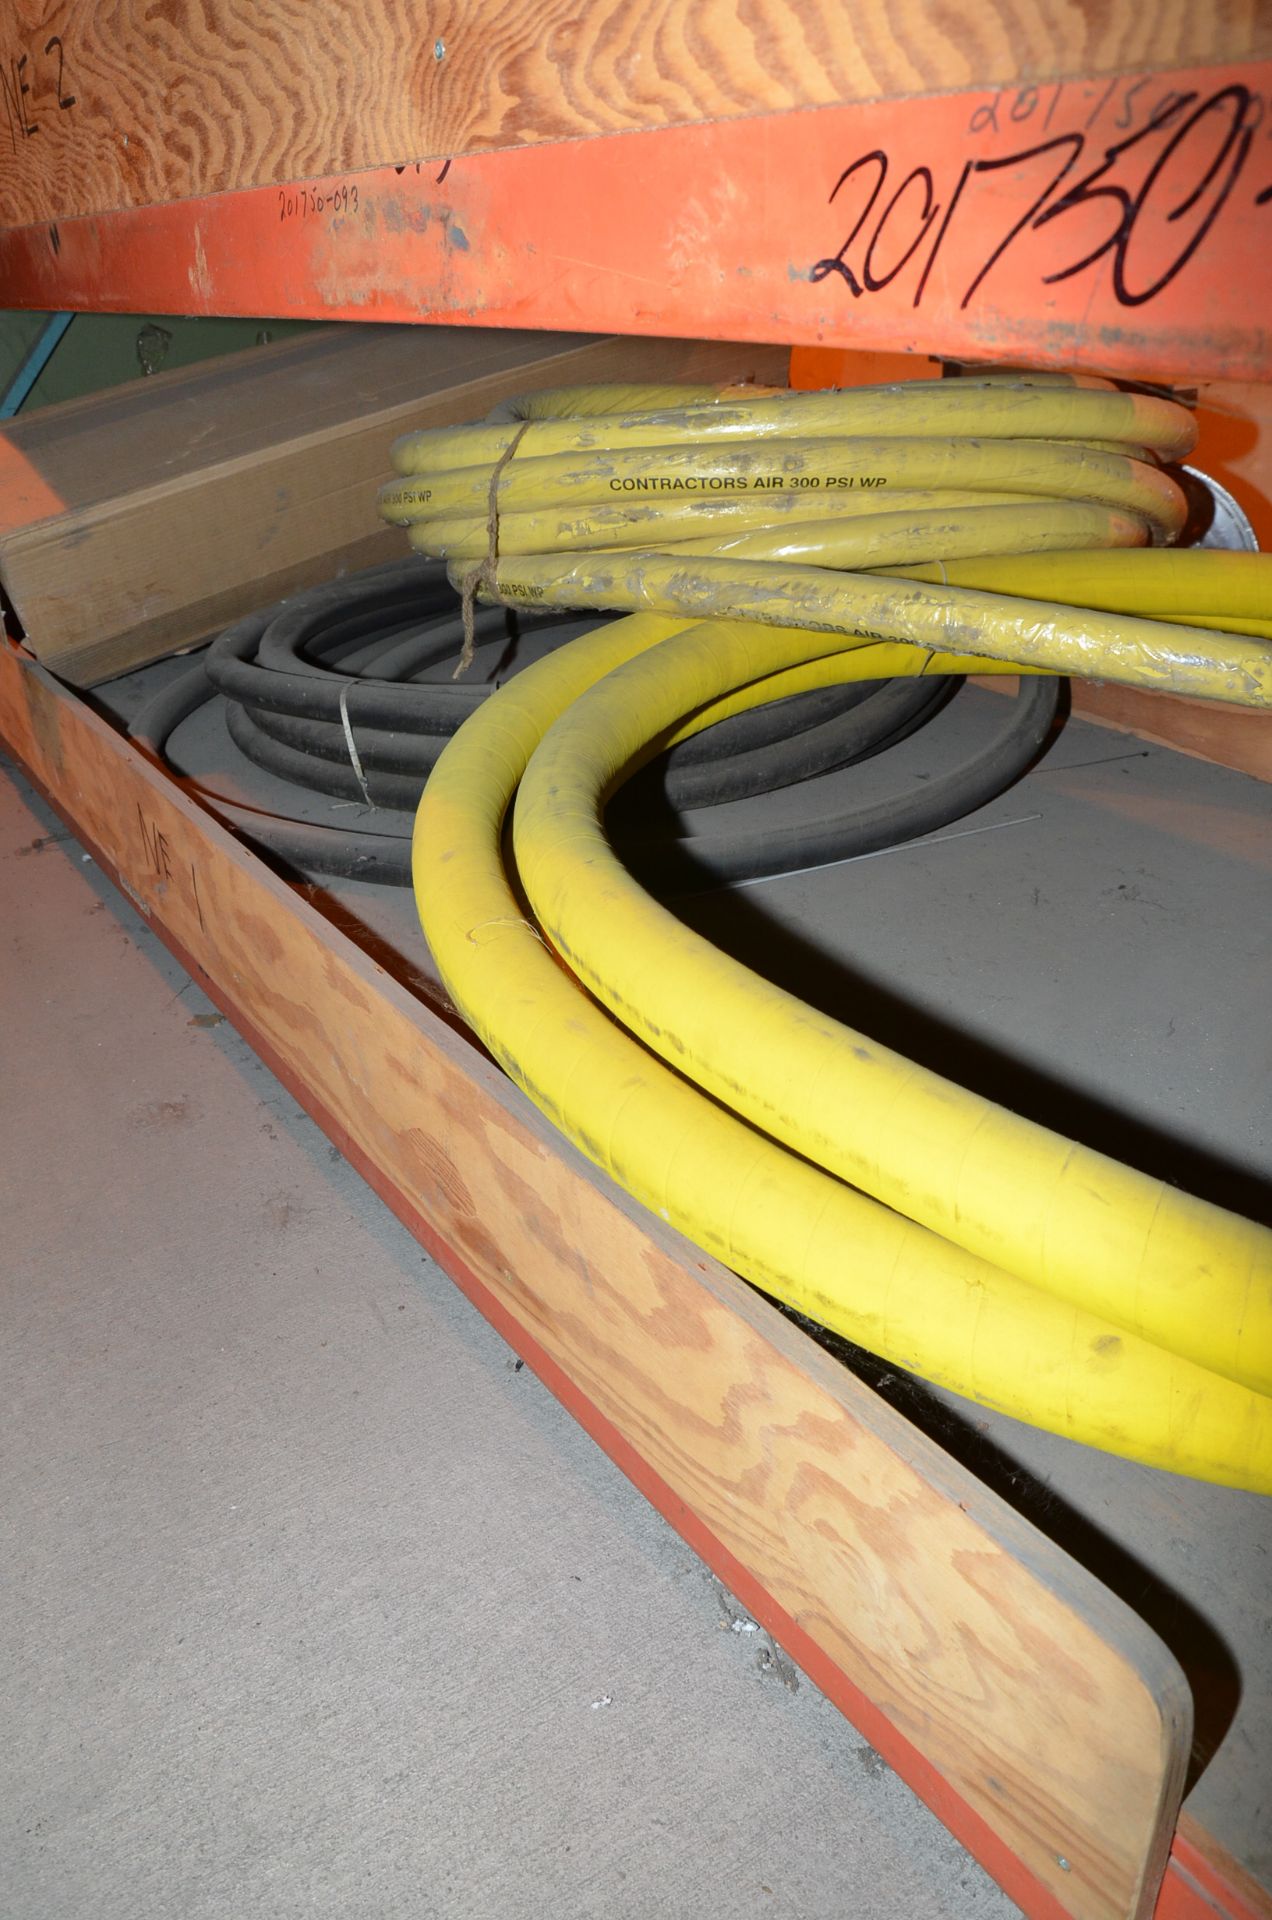 LOT/ CONTENTS OF RACK - INCLUDING PNEUMATIC & HYDRAULIC HOSE [RIGGING FEE FOR LOT #222 - $TBD USD - Image 7 of 10